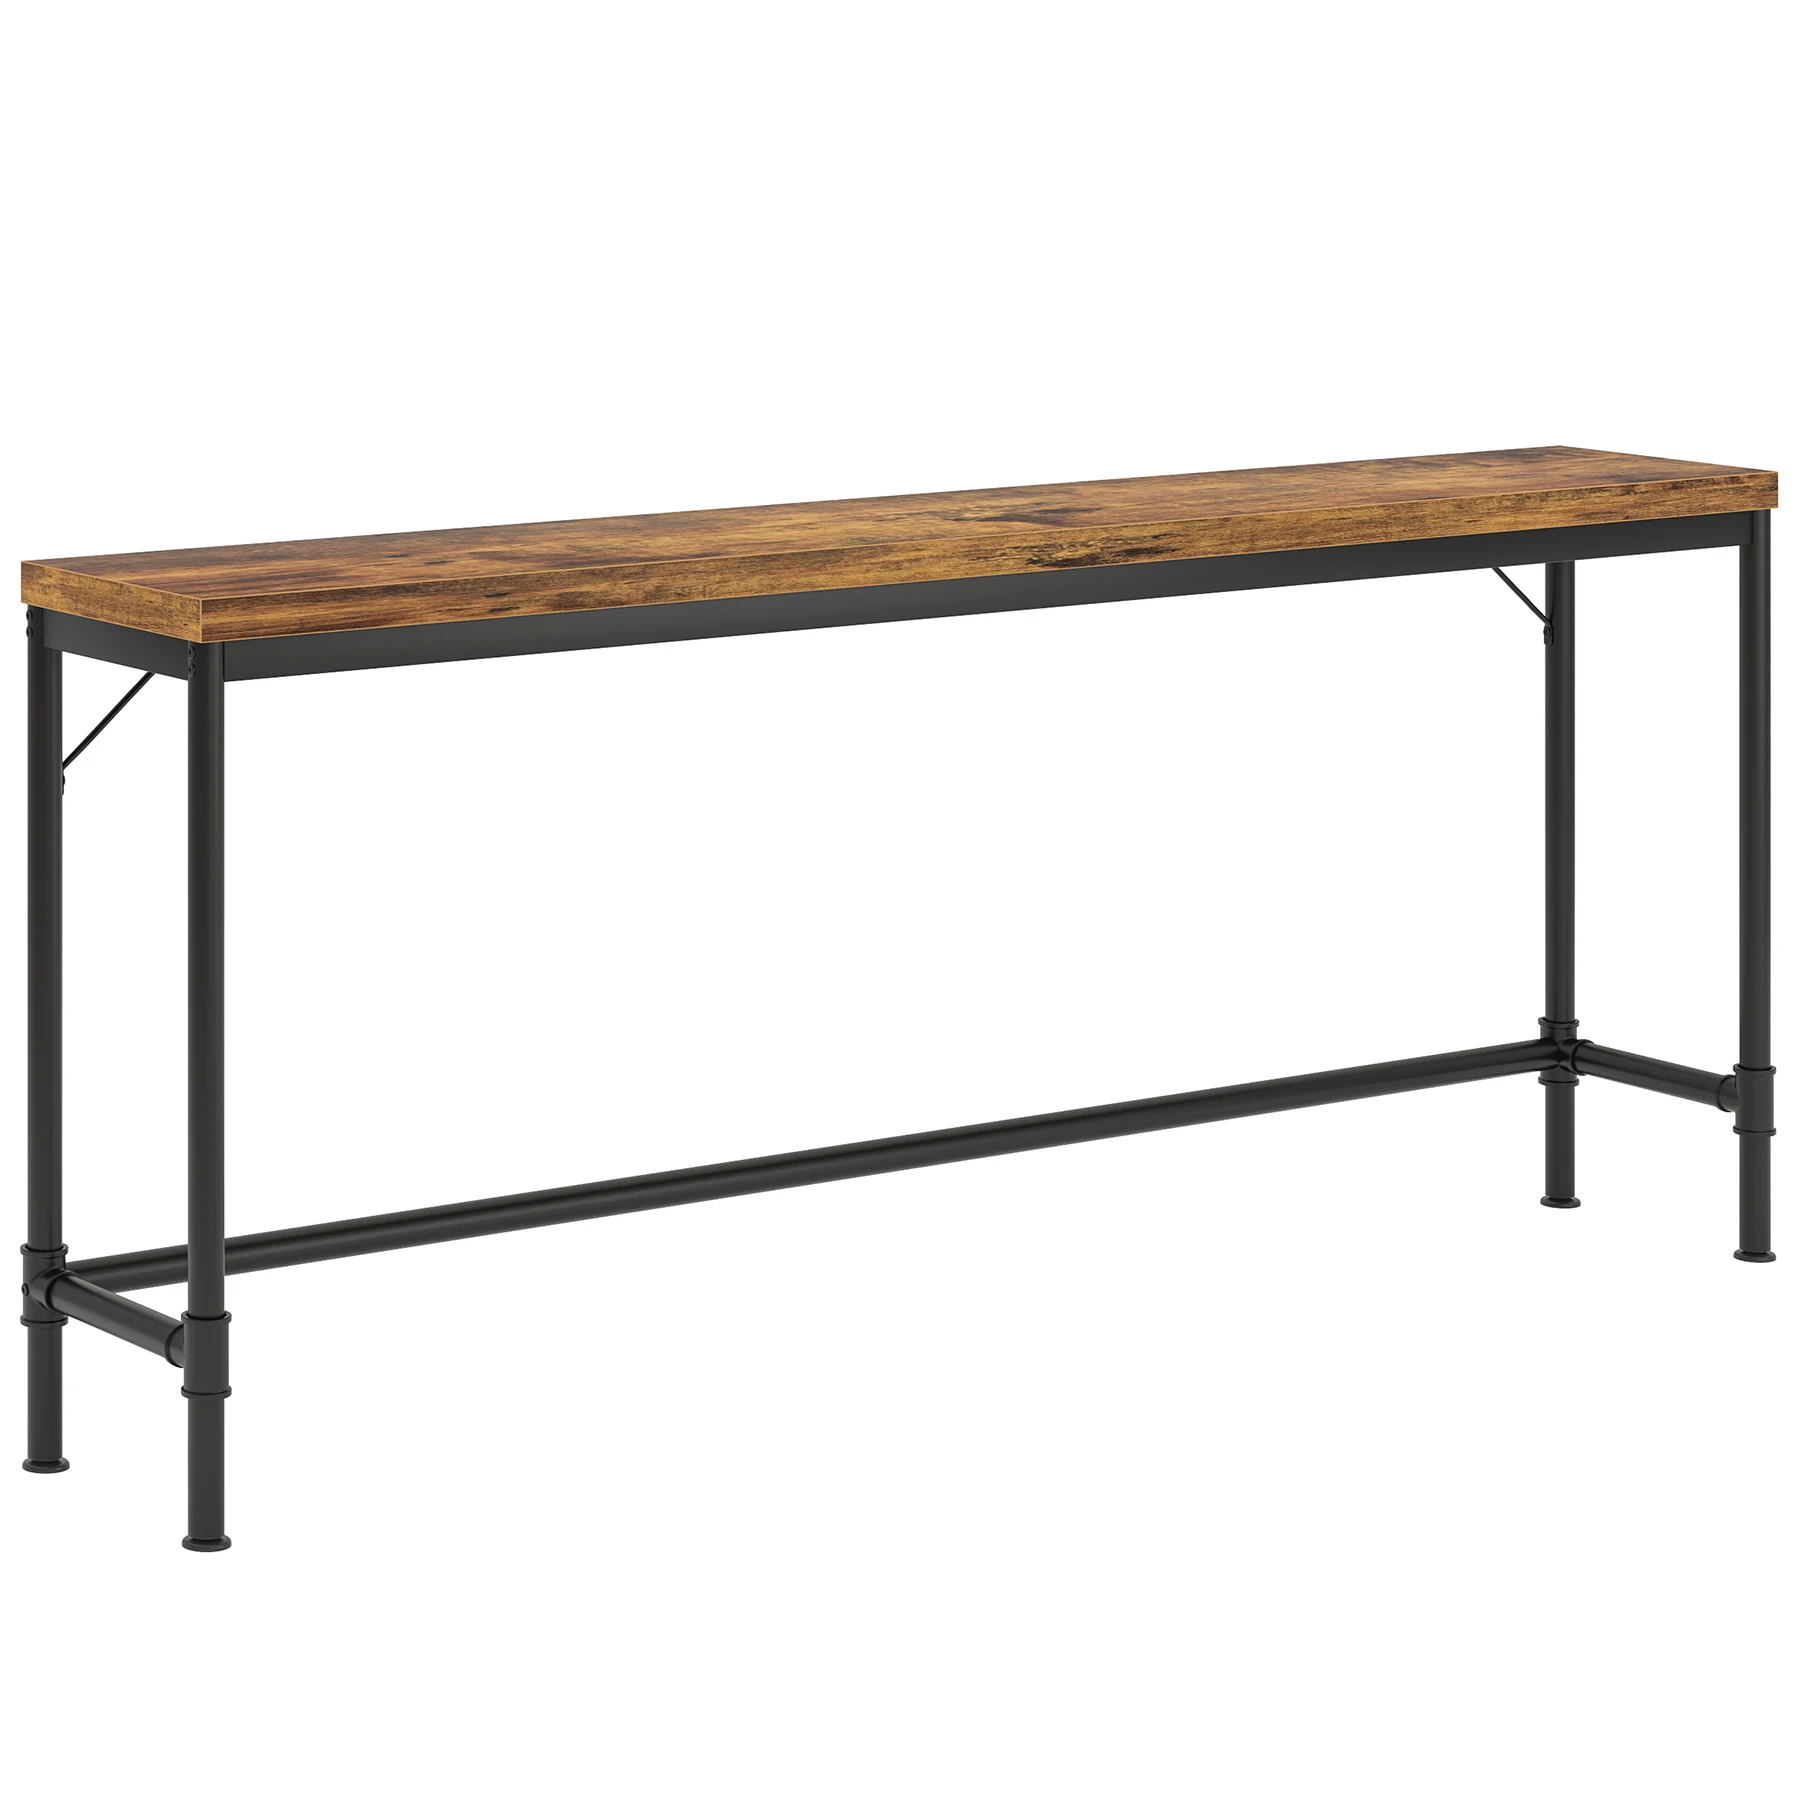 Home Decor Modern Entry Black Console Sofa Table Entryway Table With Heavy Duty Metal And Board